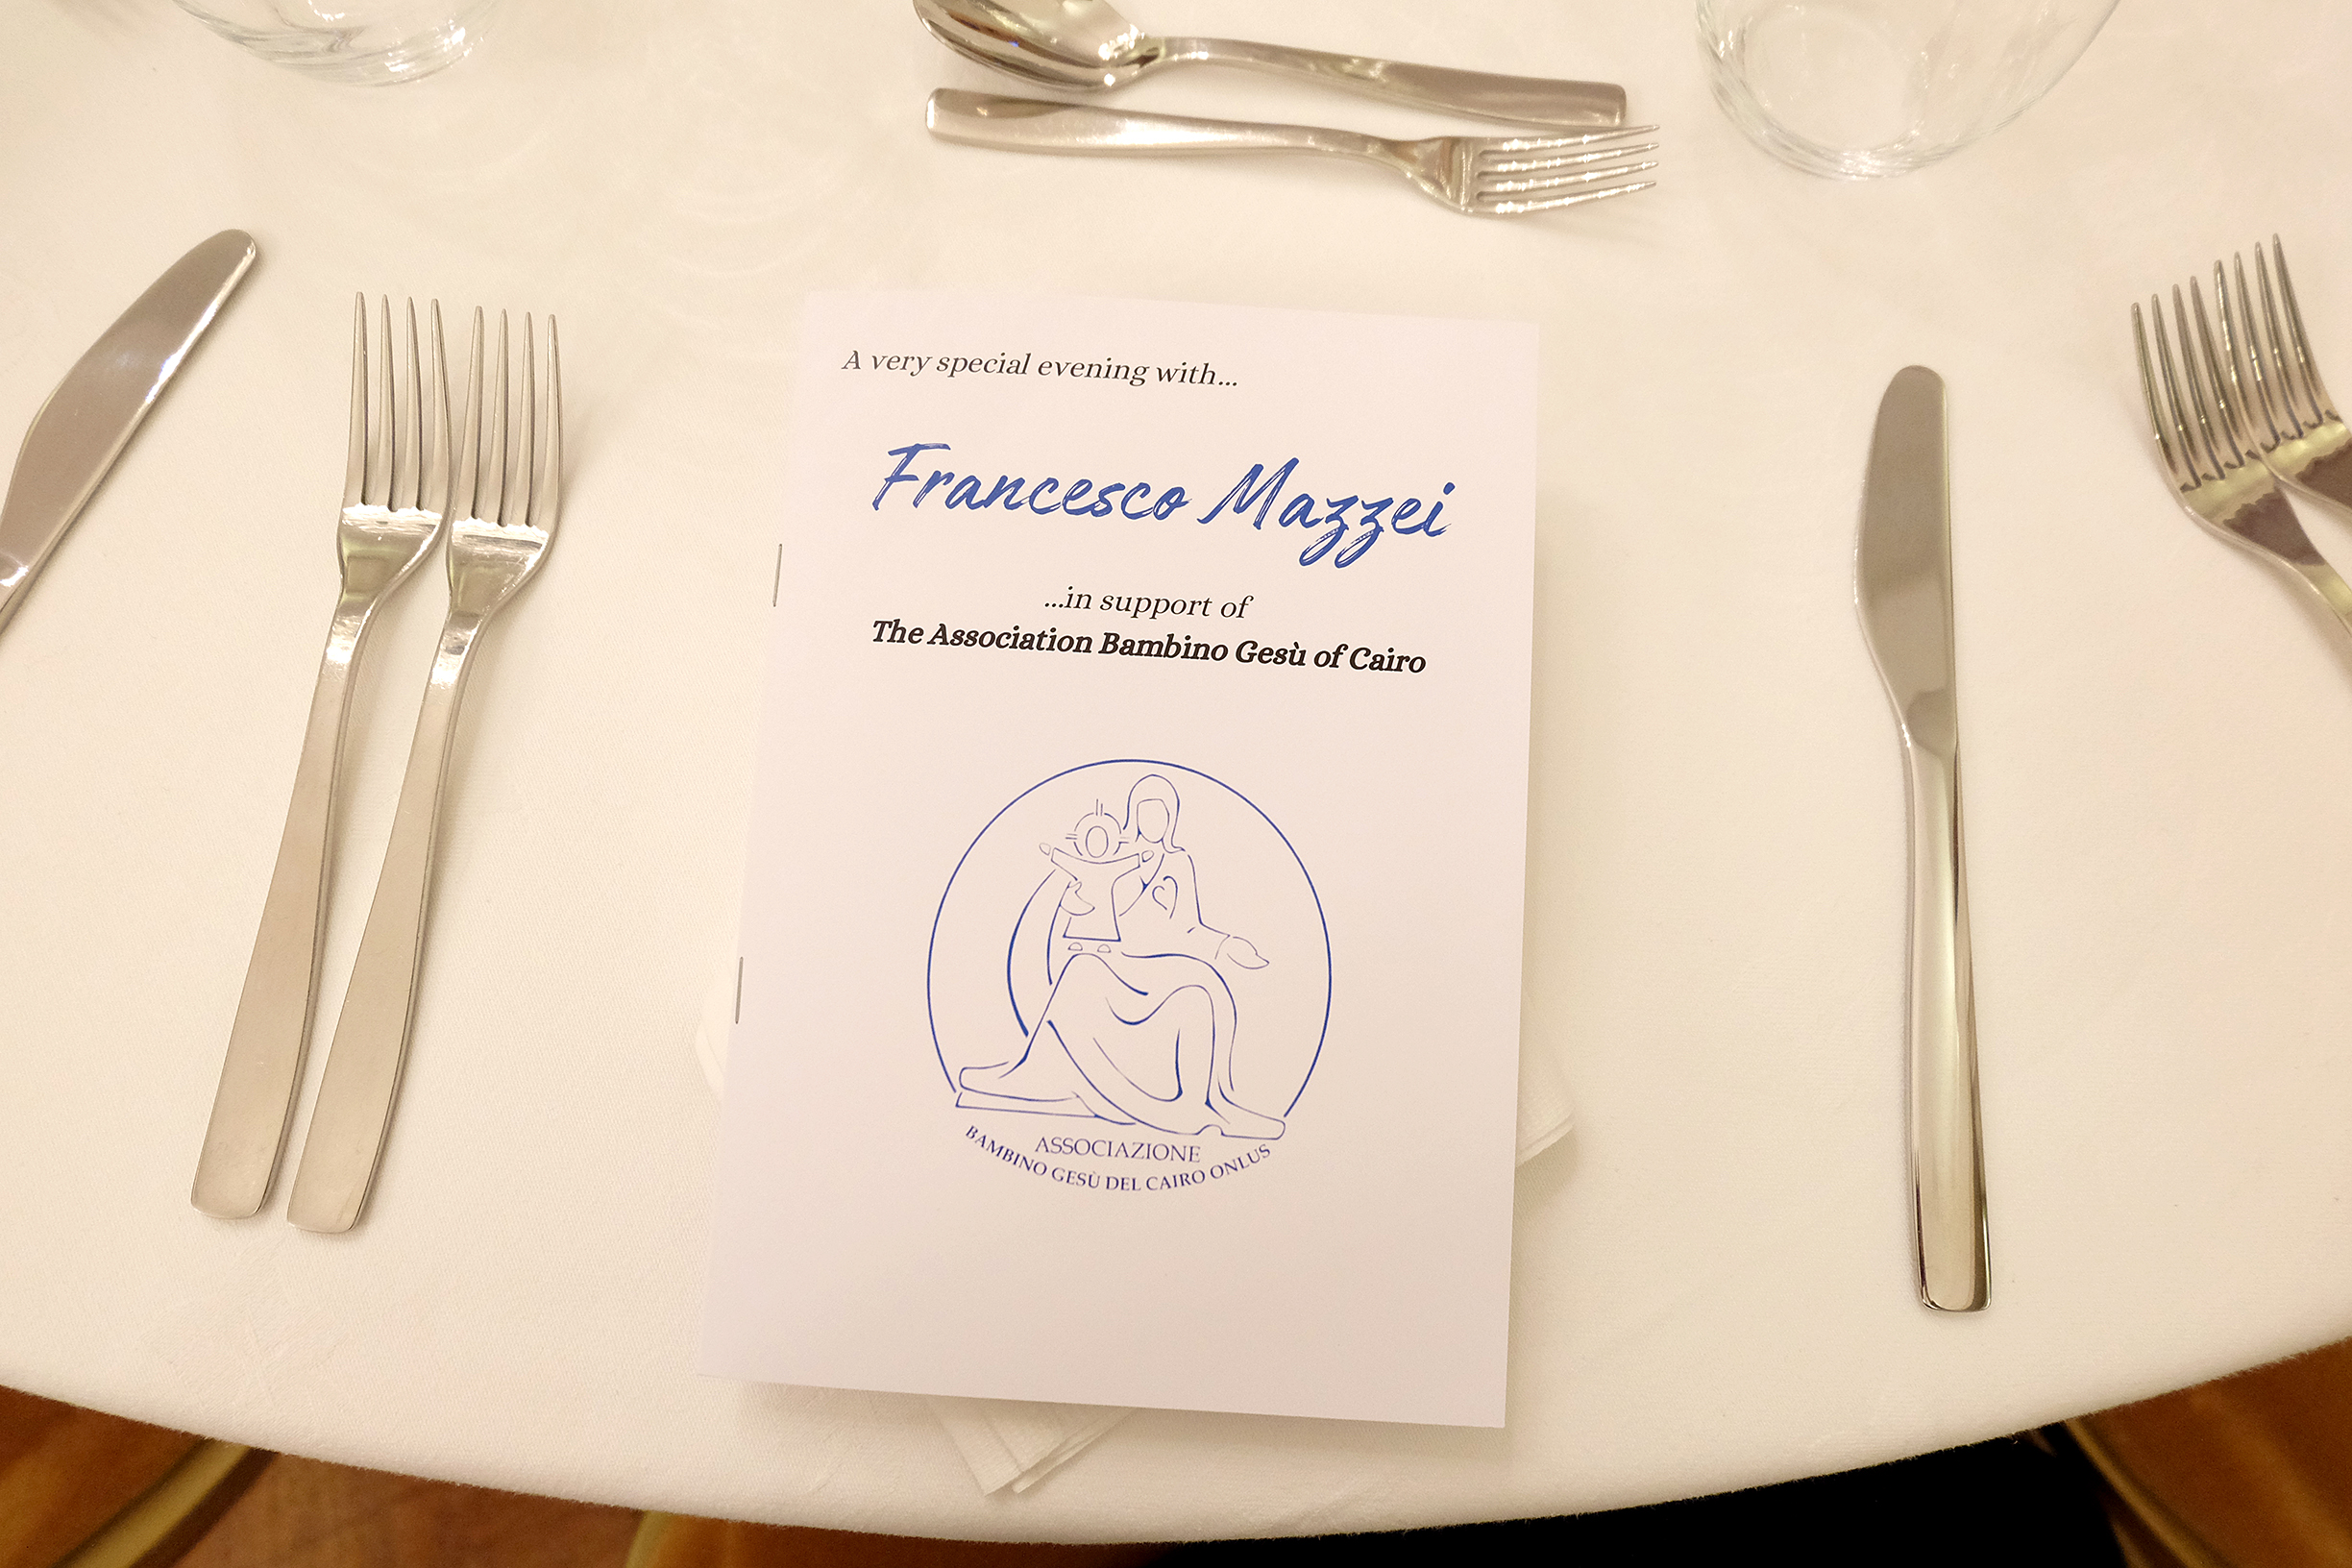 Raising funds for a good cause with Francesco Mazzei